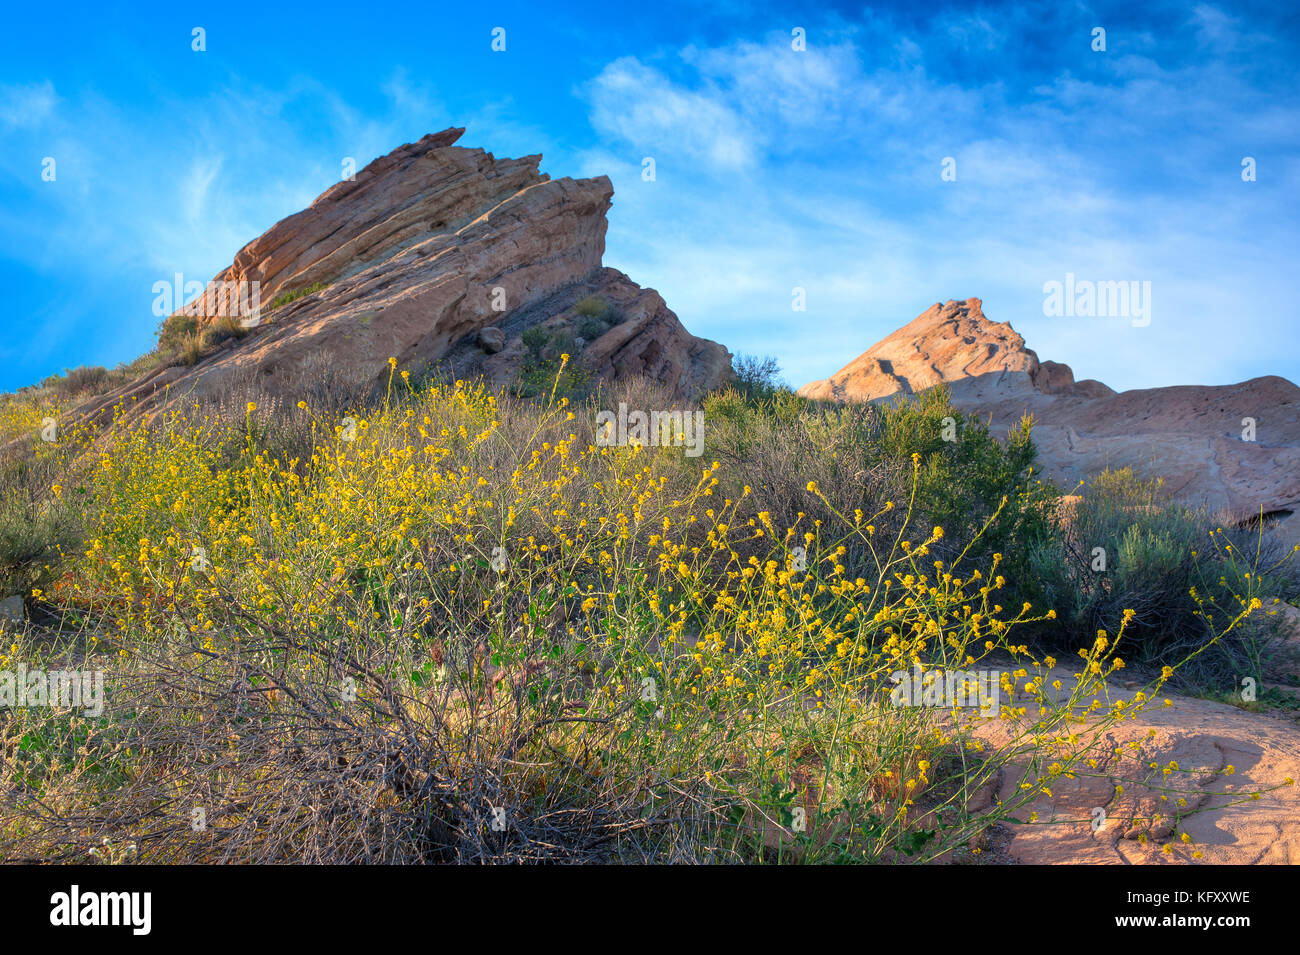 Iconic Vasquez Rocks with yellow blooming plants in the foreground photographed at sunset in Vasquez Rocks Natural Area Park, Santa Clarita, CA. Stock Photo